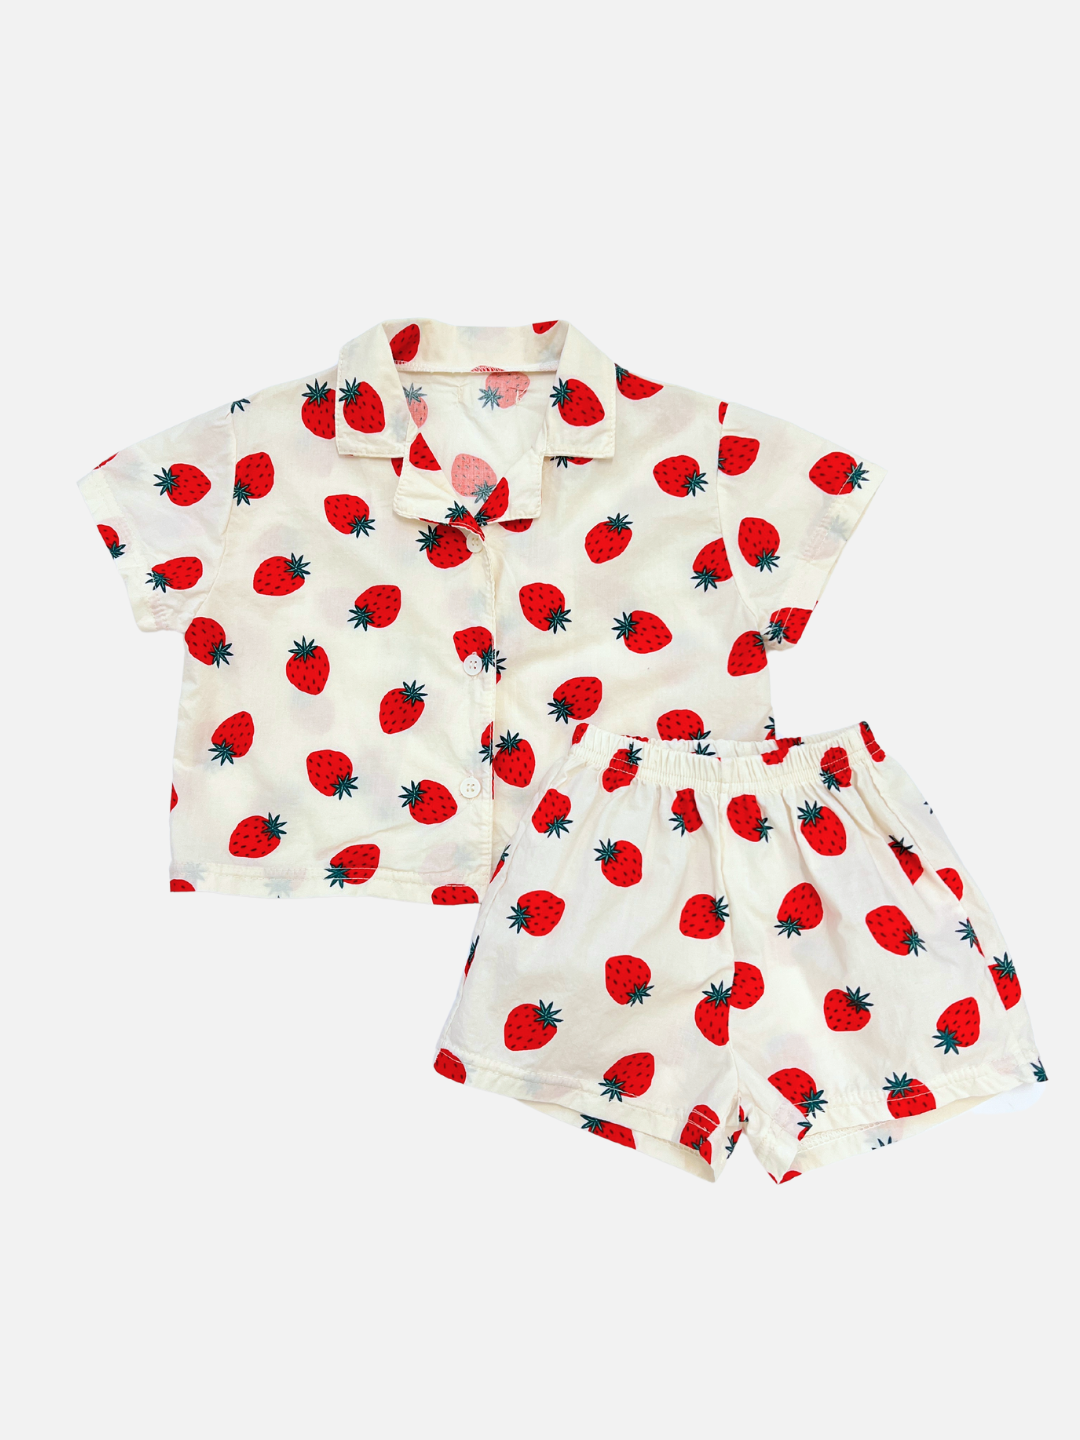 A front view of the baby Berry Season Set. Classic all over strawberry print, this set includes a button up top and shorts in ivory. The top features an oversized and boxy fit.